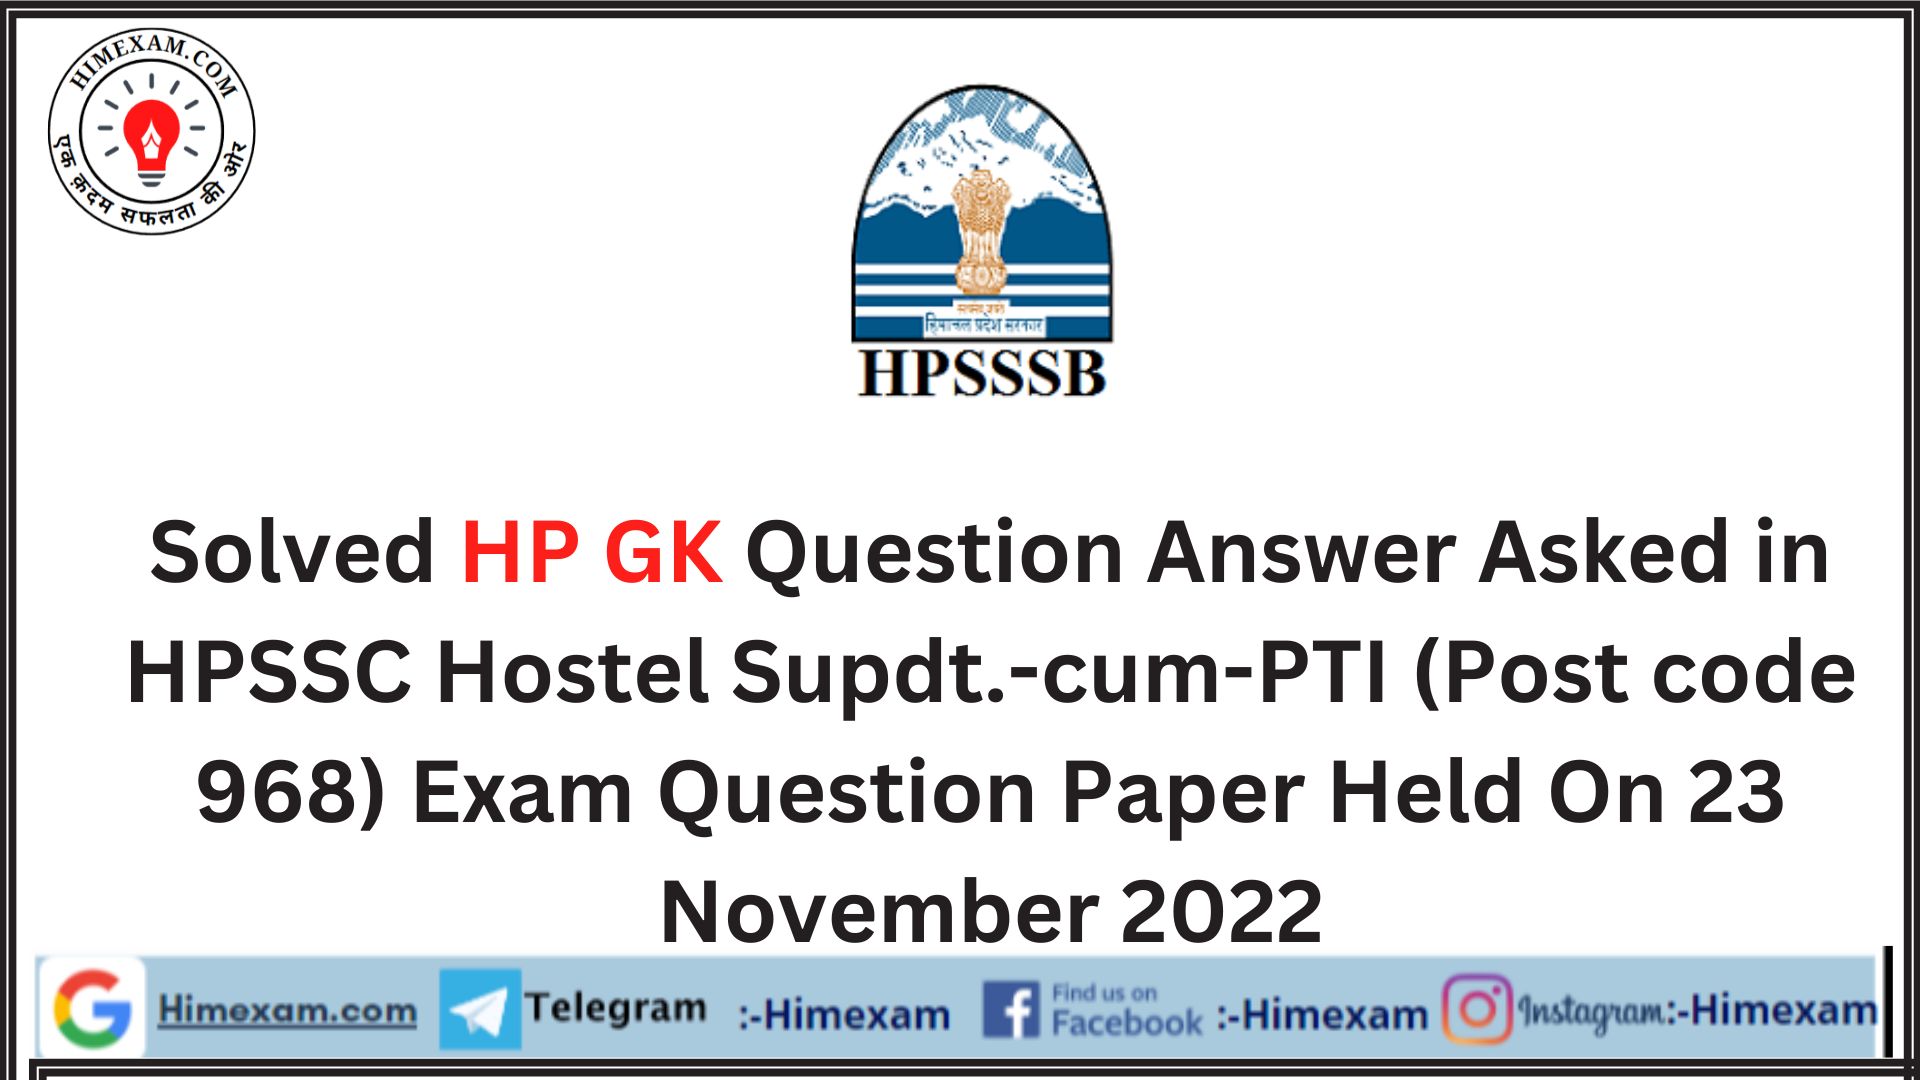 Solved HP GK Question Answer Asked in HPSSC Hostel Supdt.-cum-PTI (Post code 968) Exam Question Paper Held On 23 November 2022